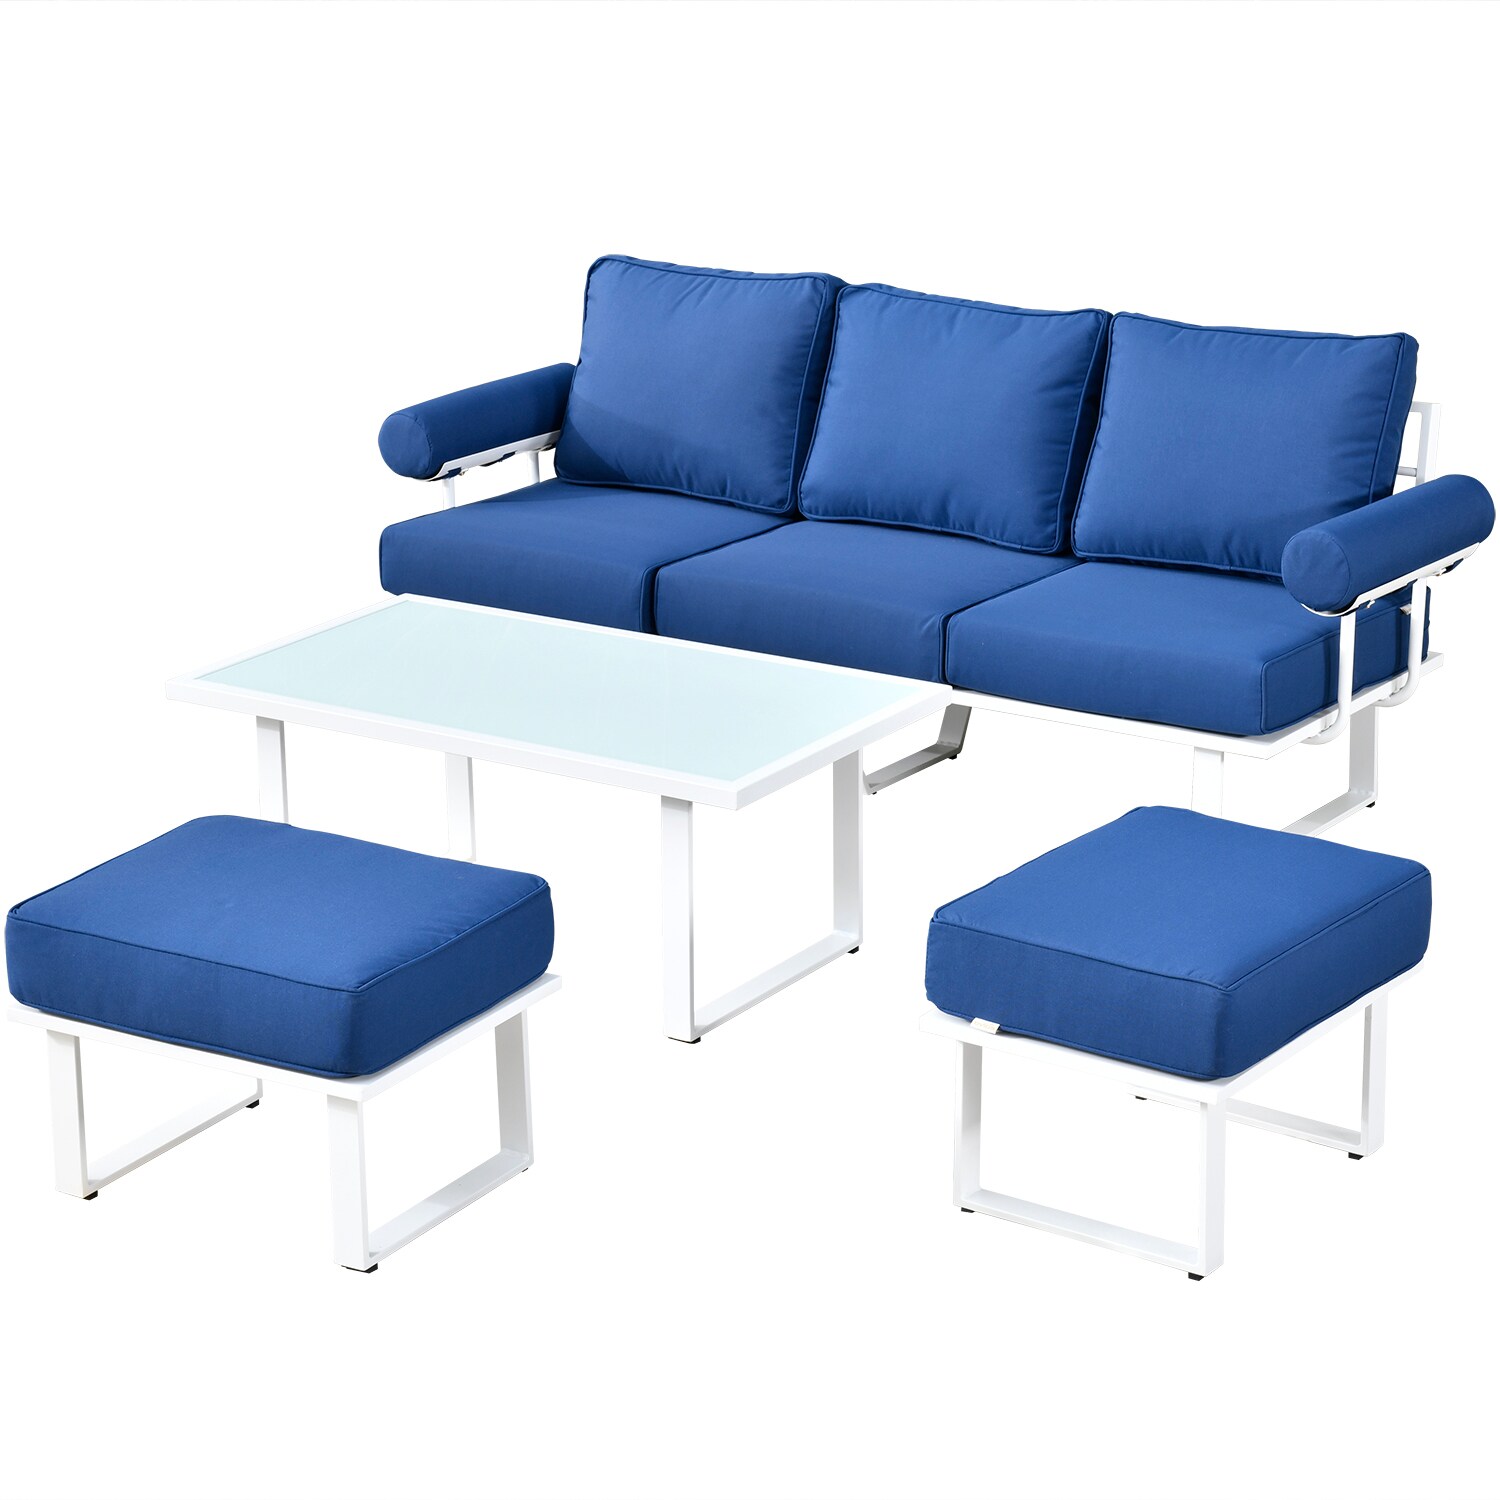 XIZZI Athena Outdoor Sofa with Blue Cushion(S) and Aluminum Frame 